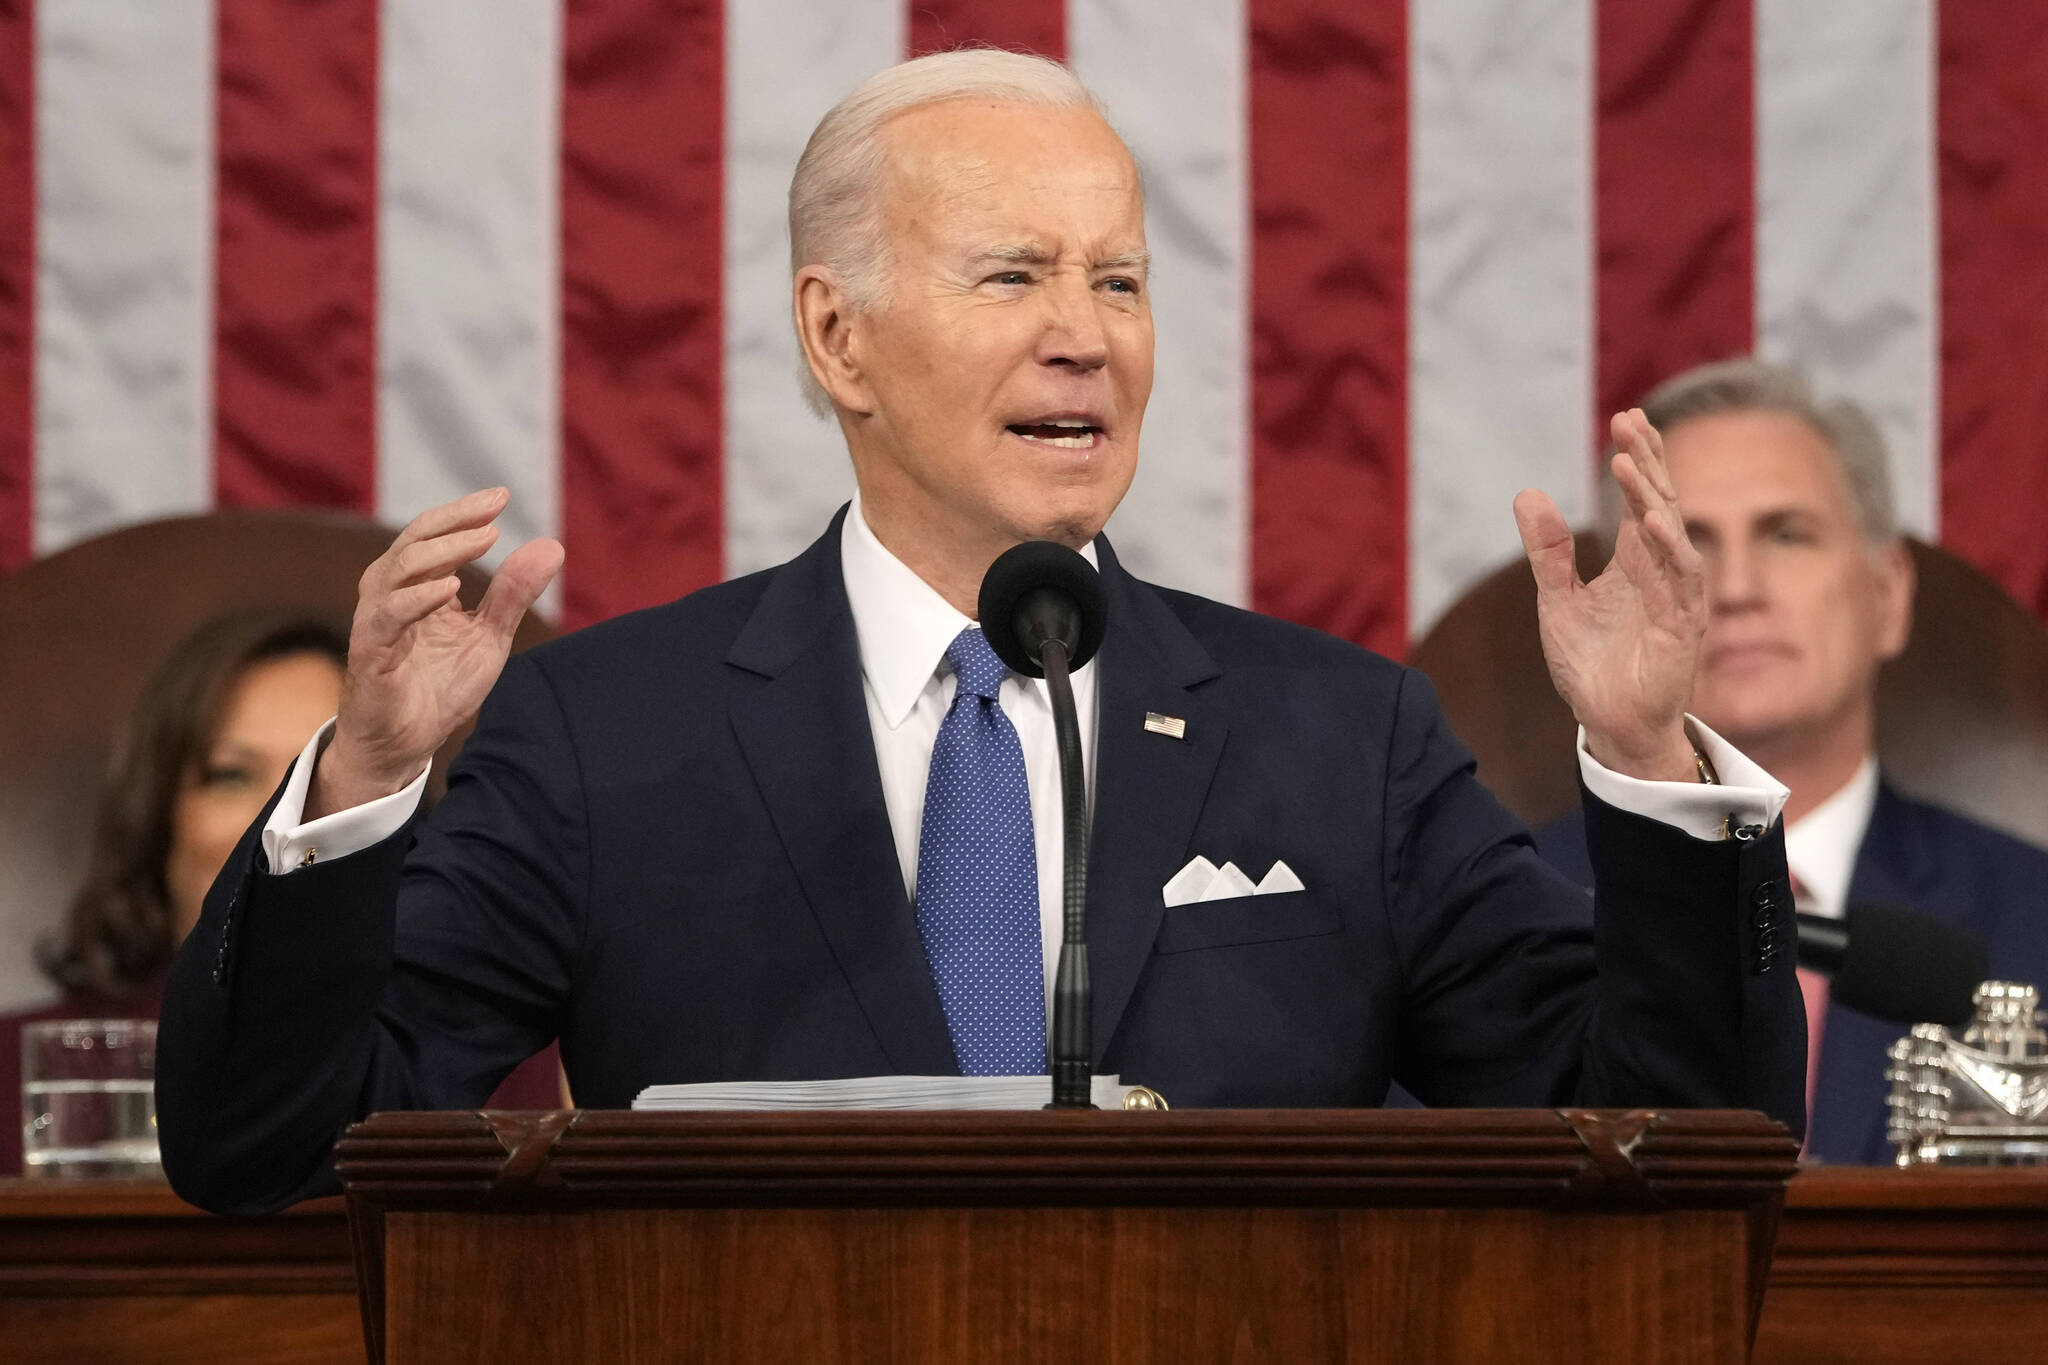 Jacquelyn Martin, Pool 
President Joe Biden delivers the State of the Union address to a joint session of Congress at the U.S. Capitol, Tuesday, Feb. 7, 2023, in Washington, as Vice President Kamala Harris and House Speaker Kevin McCarthy of Calif., listen.